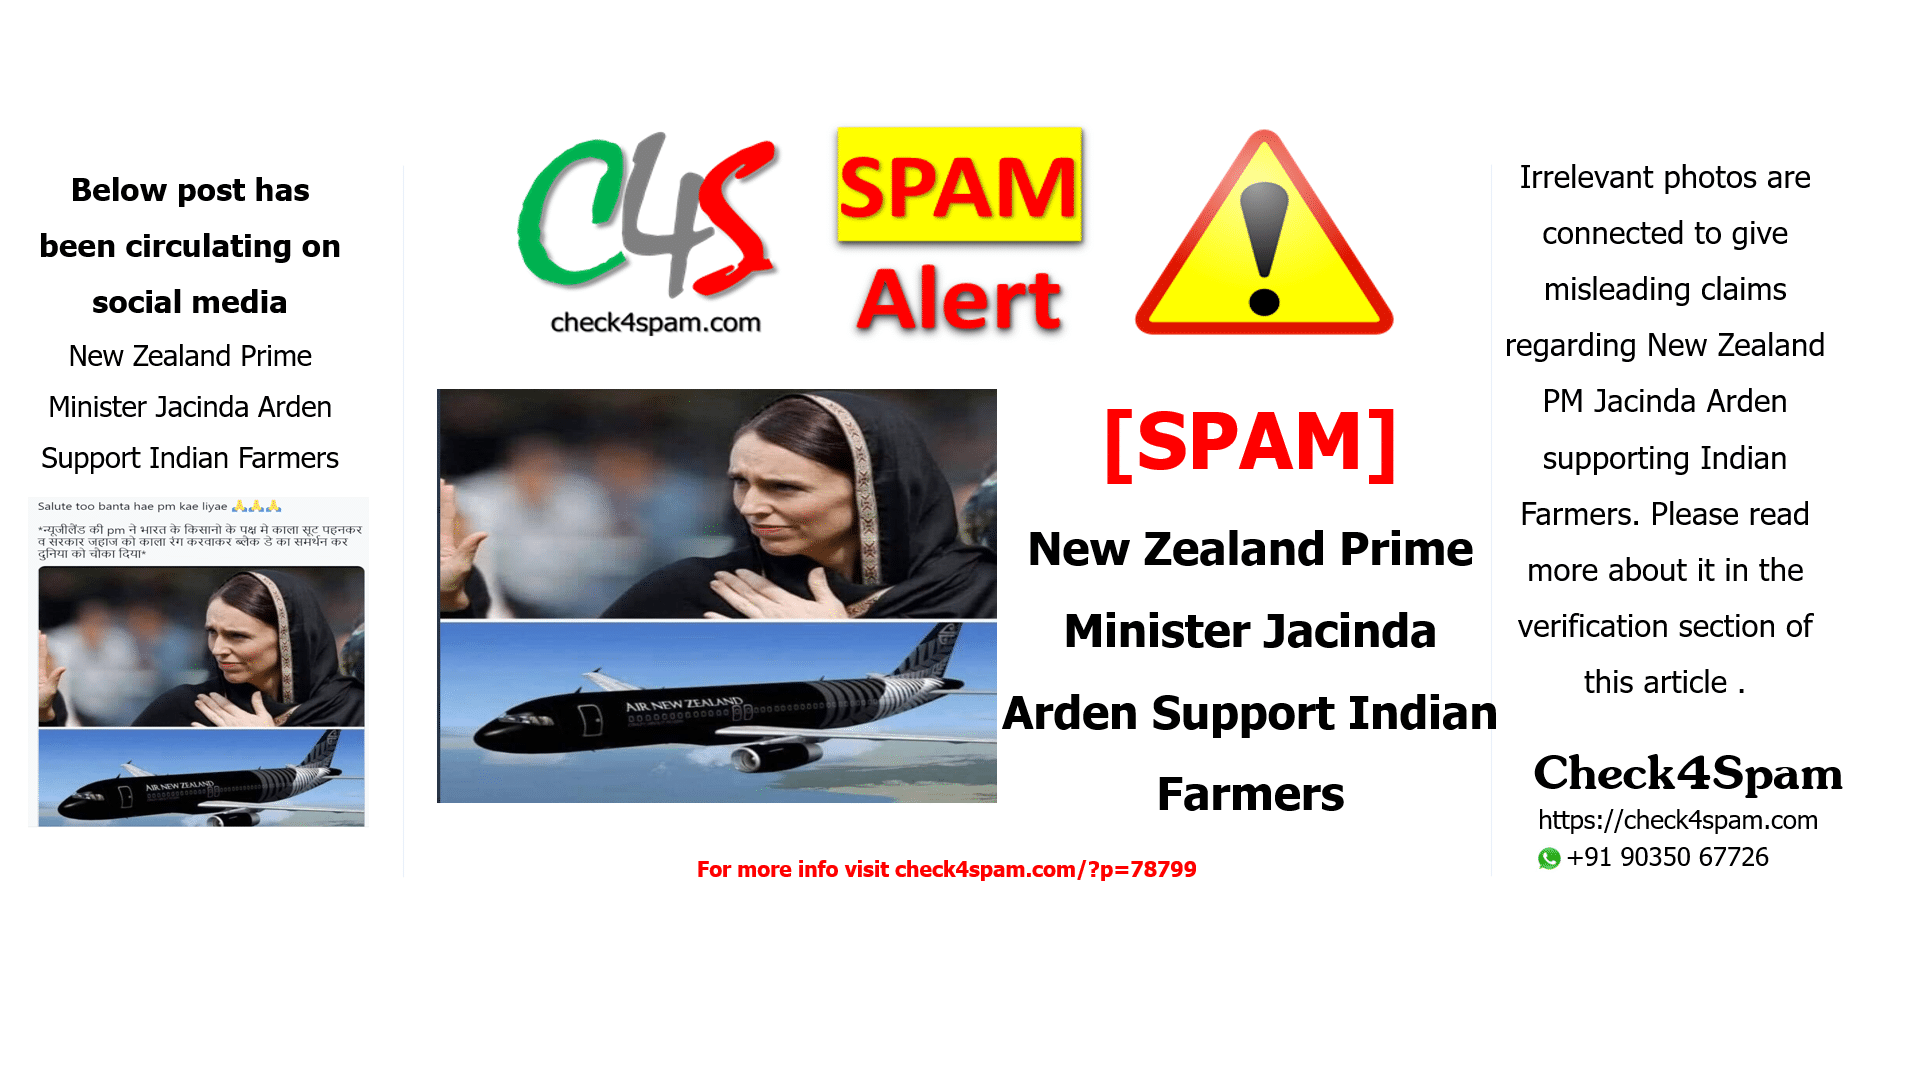 New Zealand Prime Minister Jacinda Arden Support Indian Farmers